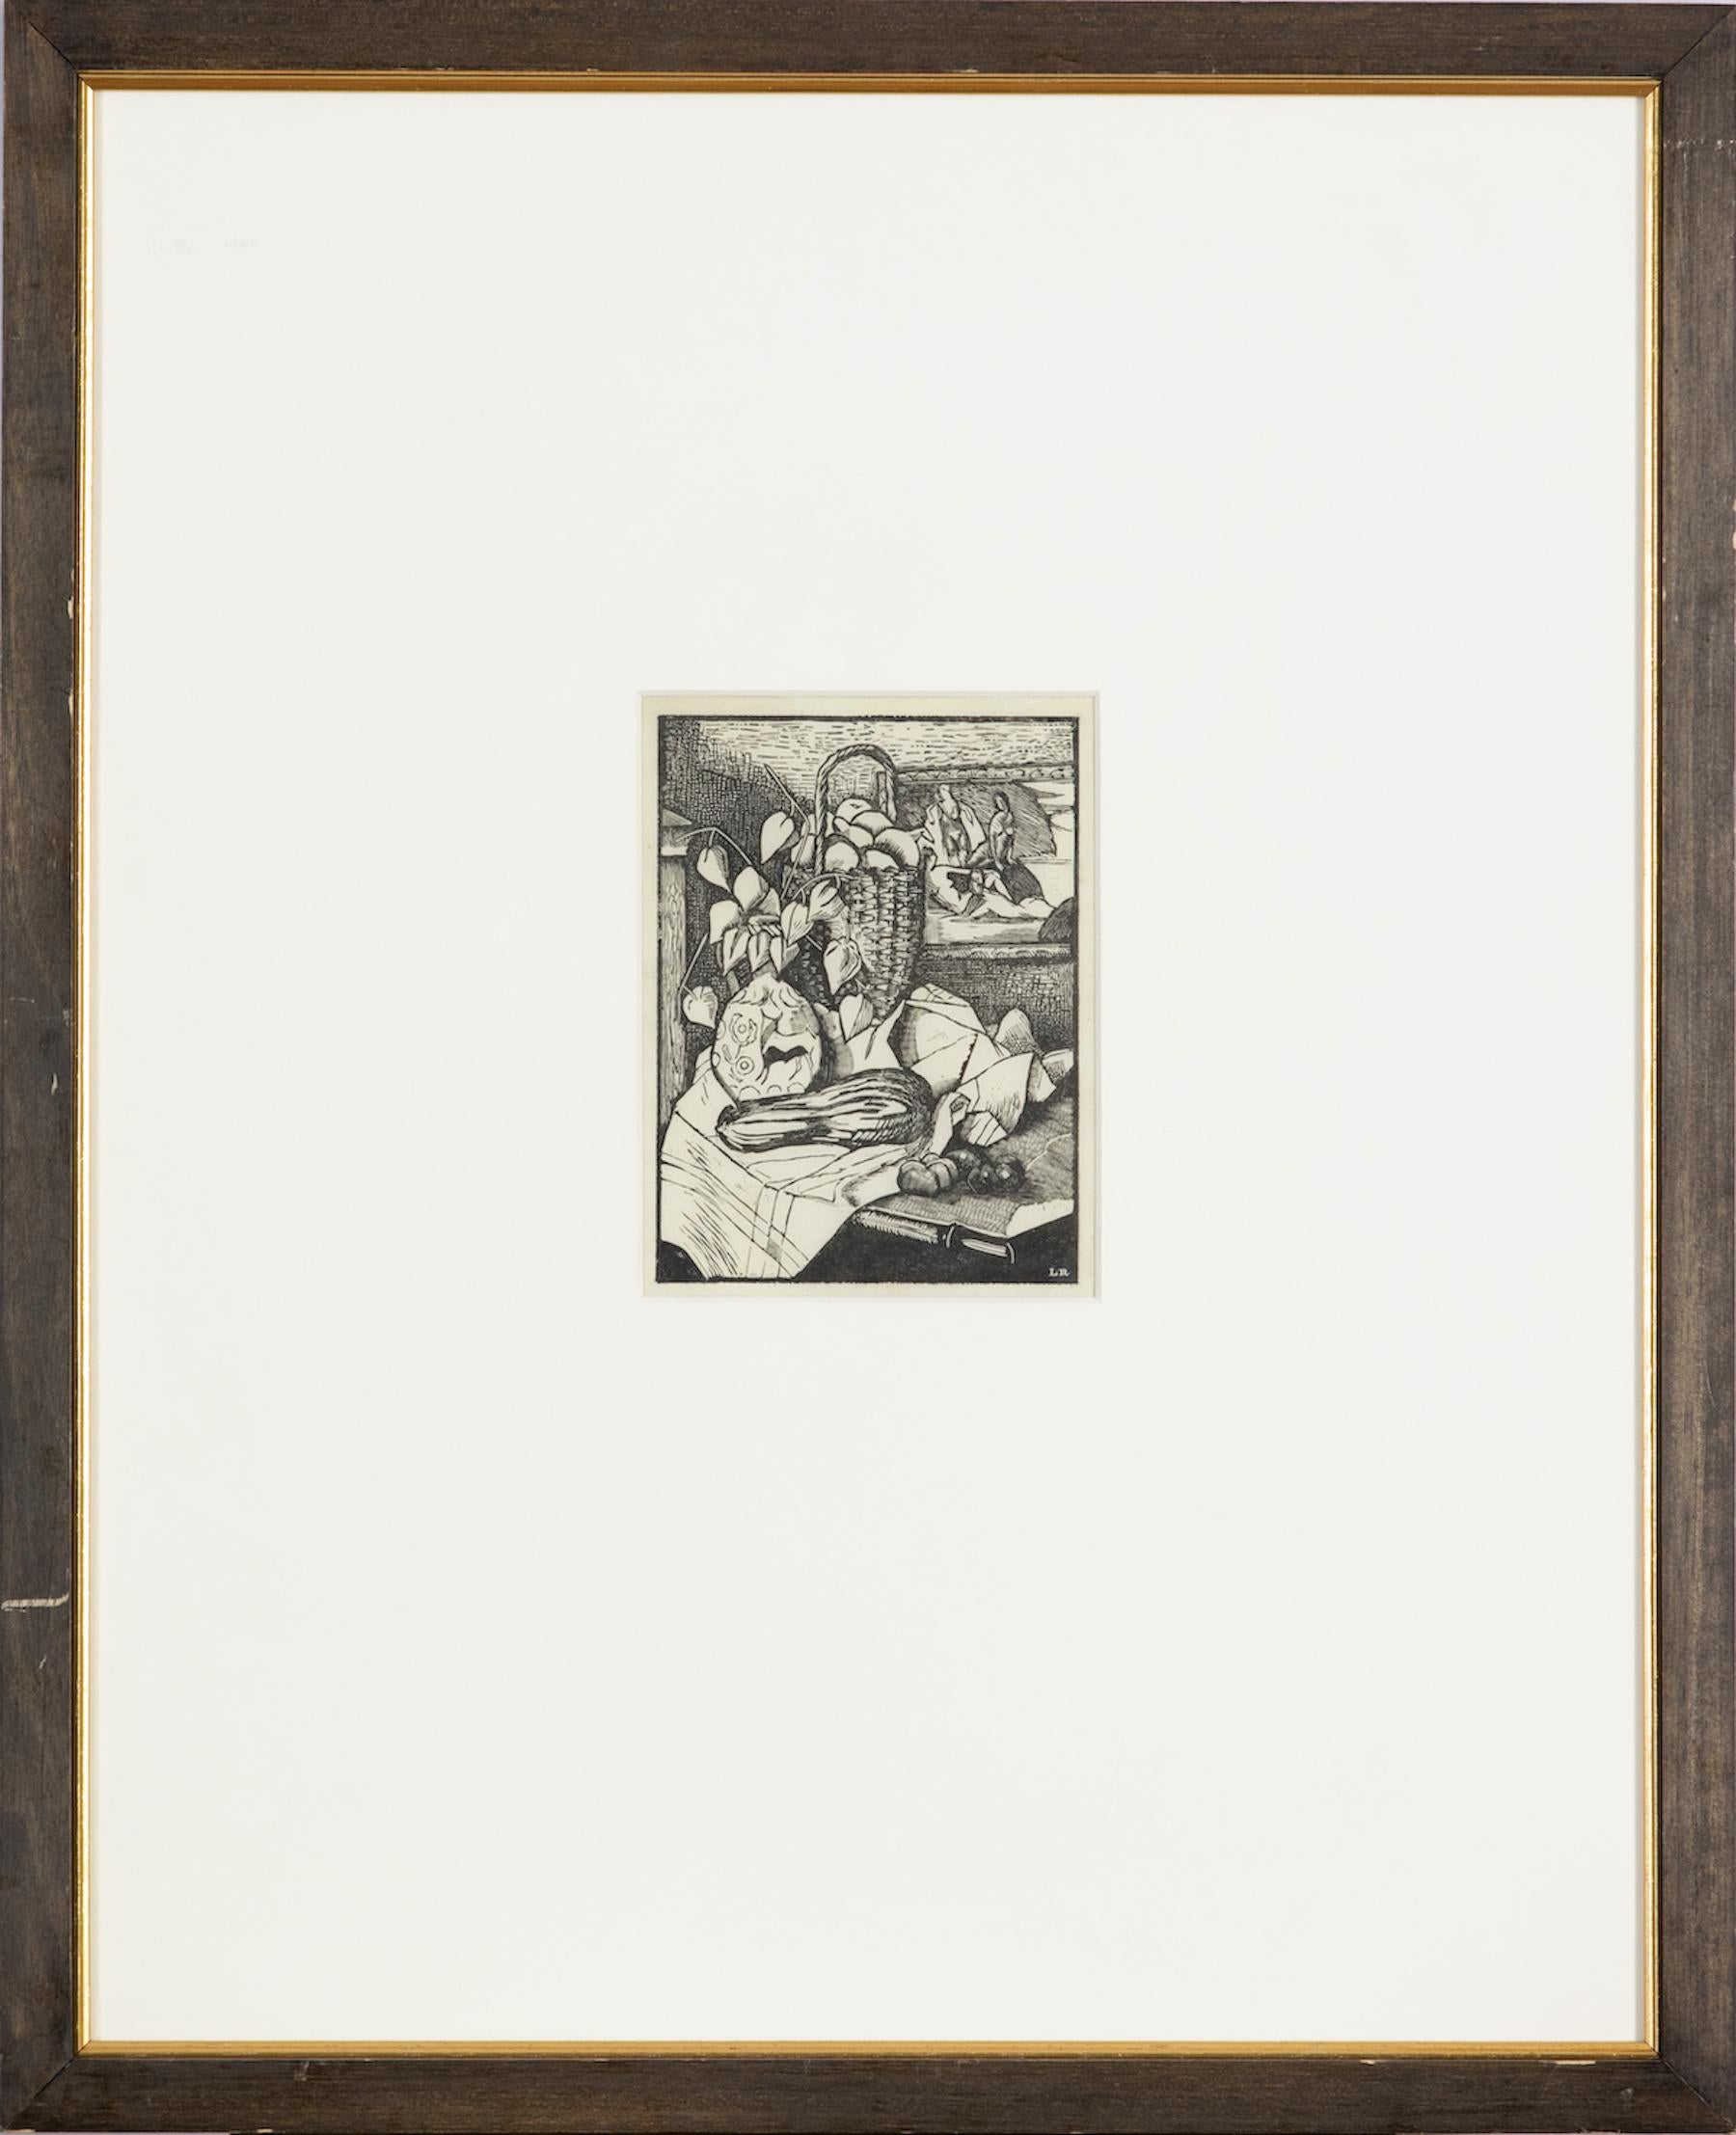 Still Life by Ludovic-Rodo Pissarro (1878-1952)
Wood engraving
14.5 x 10.8 cm (5 ³/₄ x 4 ¹/₄ inches)
Initialed LR in the plate

Exhibition
Fort Lauderdale, Museum of Art, Camille Pissarro and his Descendants, January-April 2000, no.148
London, Stern